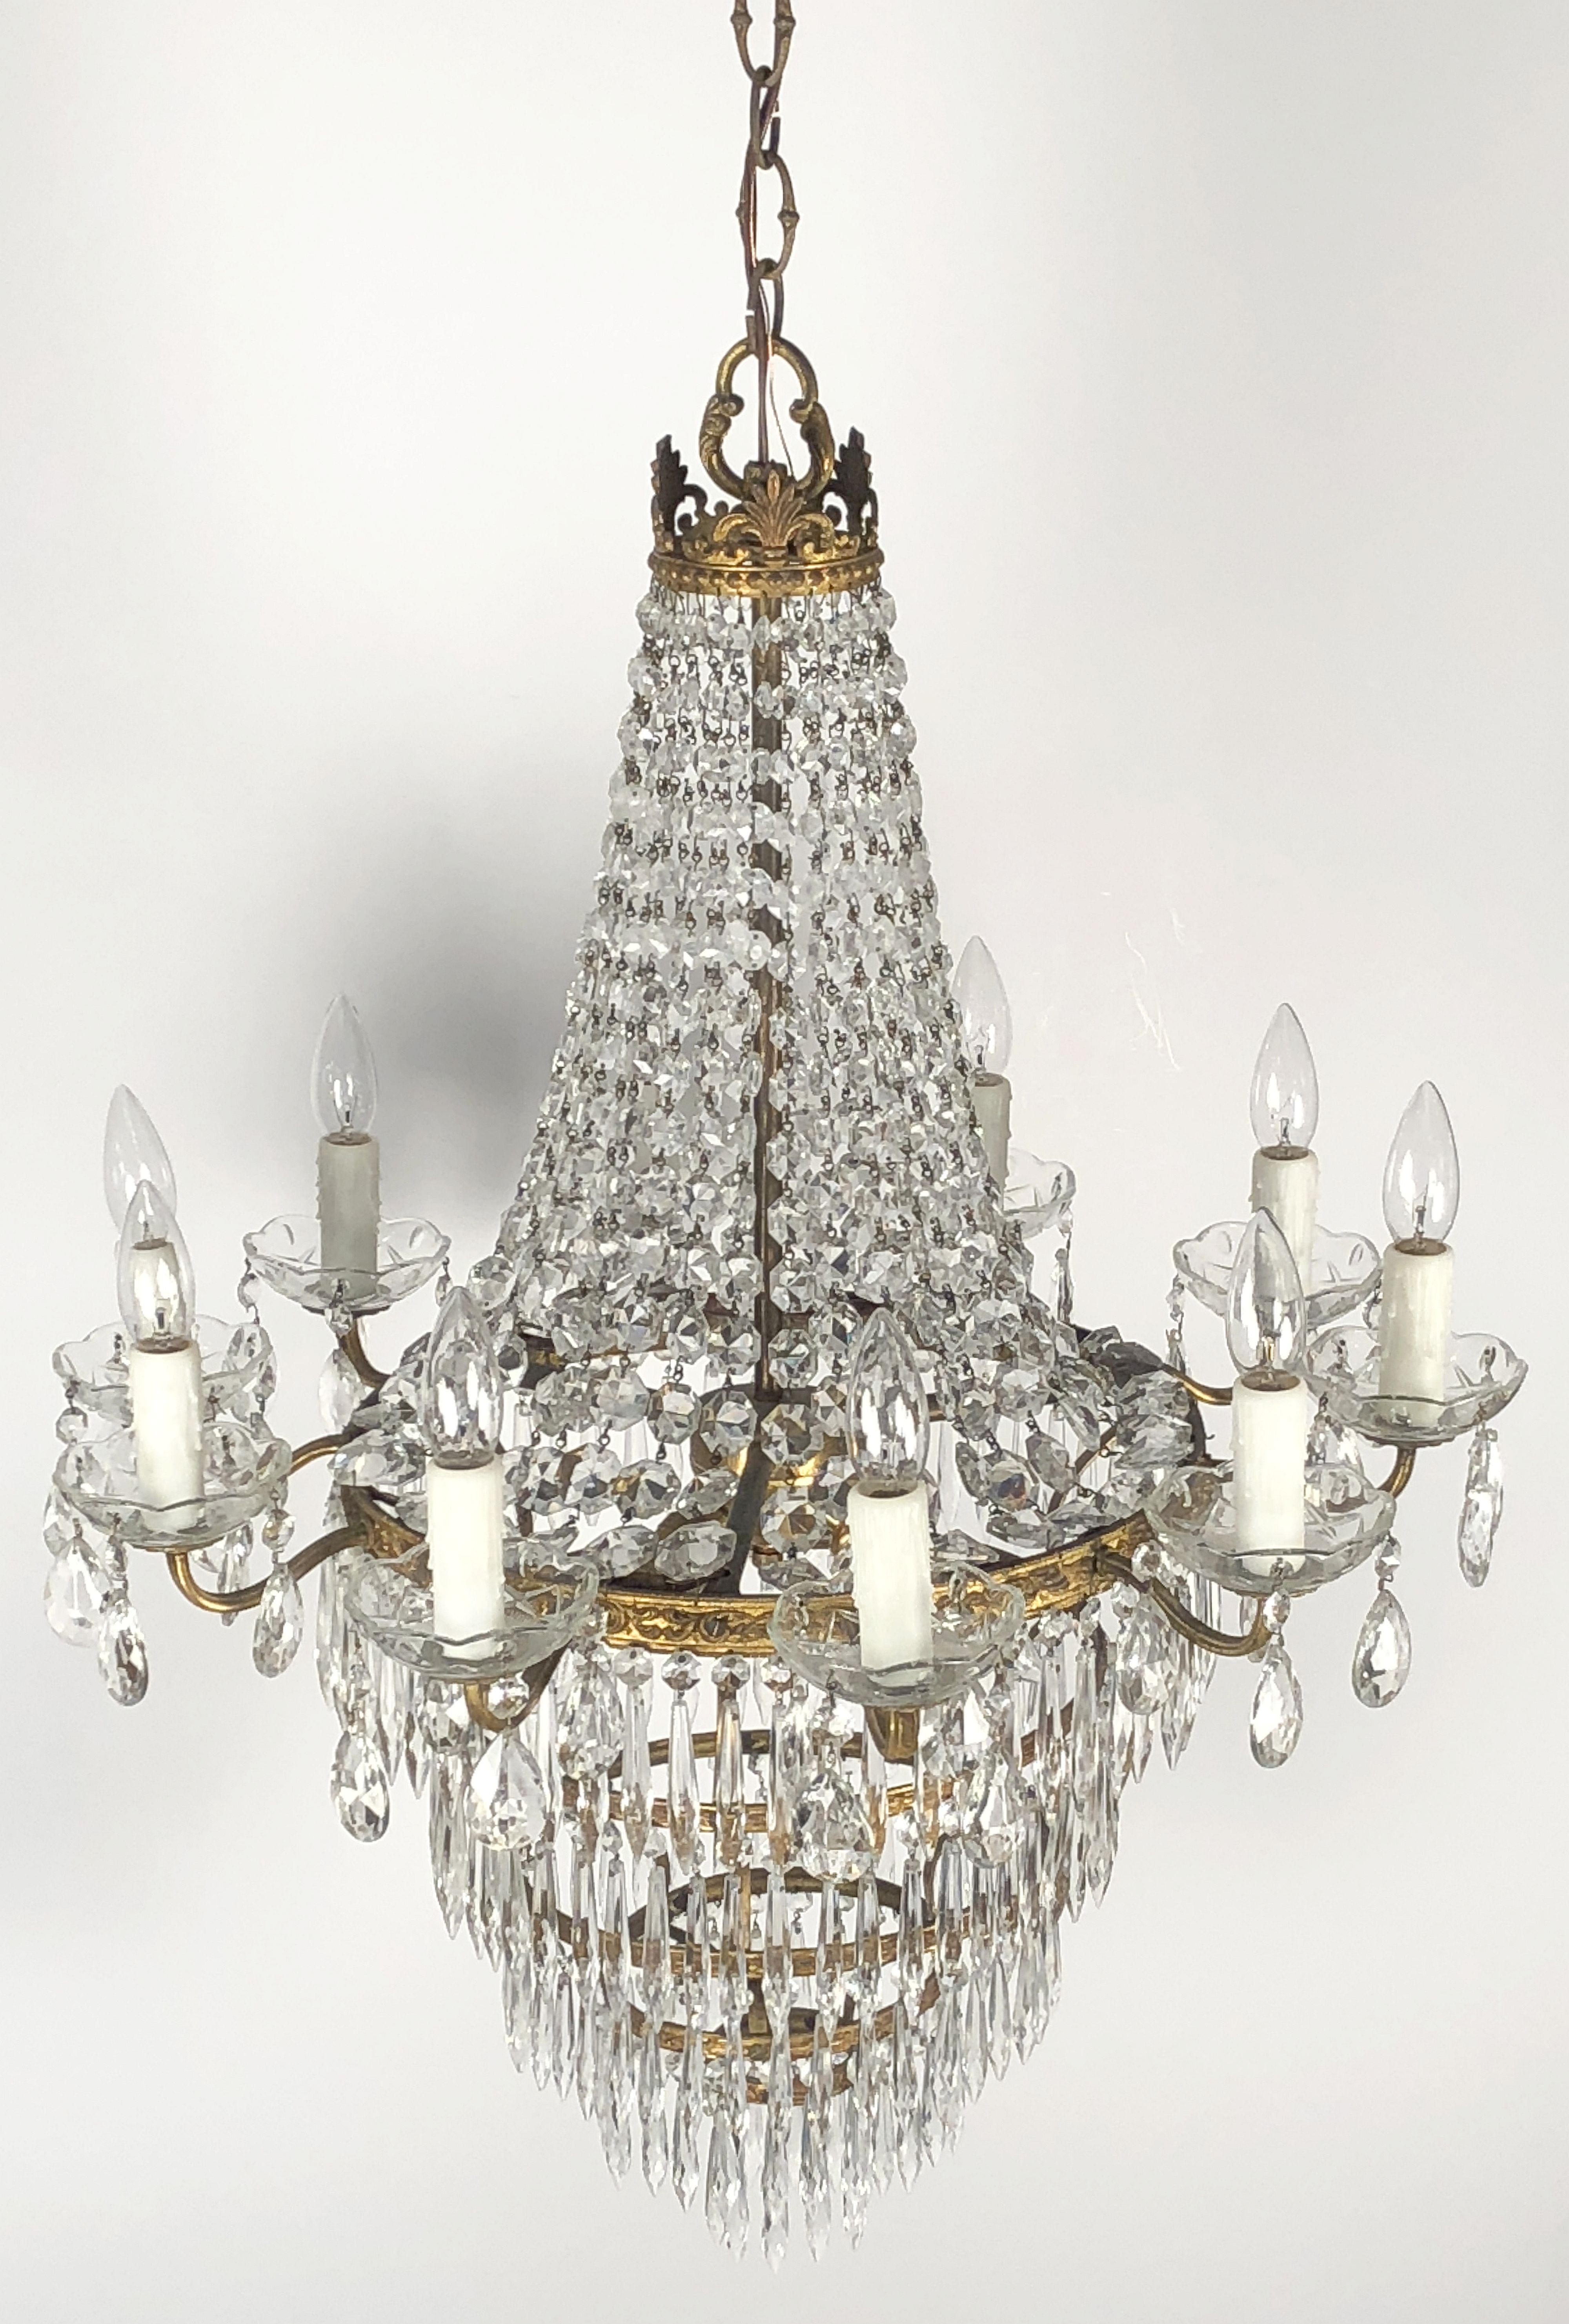 Italian Thirteen-Light Drop Crystal Chandelier, Empire Style In Good Condition For Sale In Austin, TX